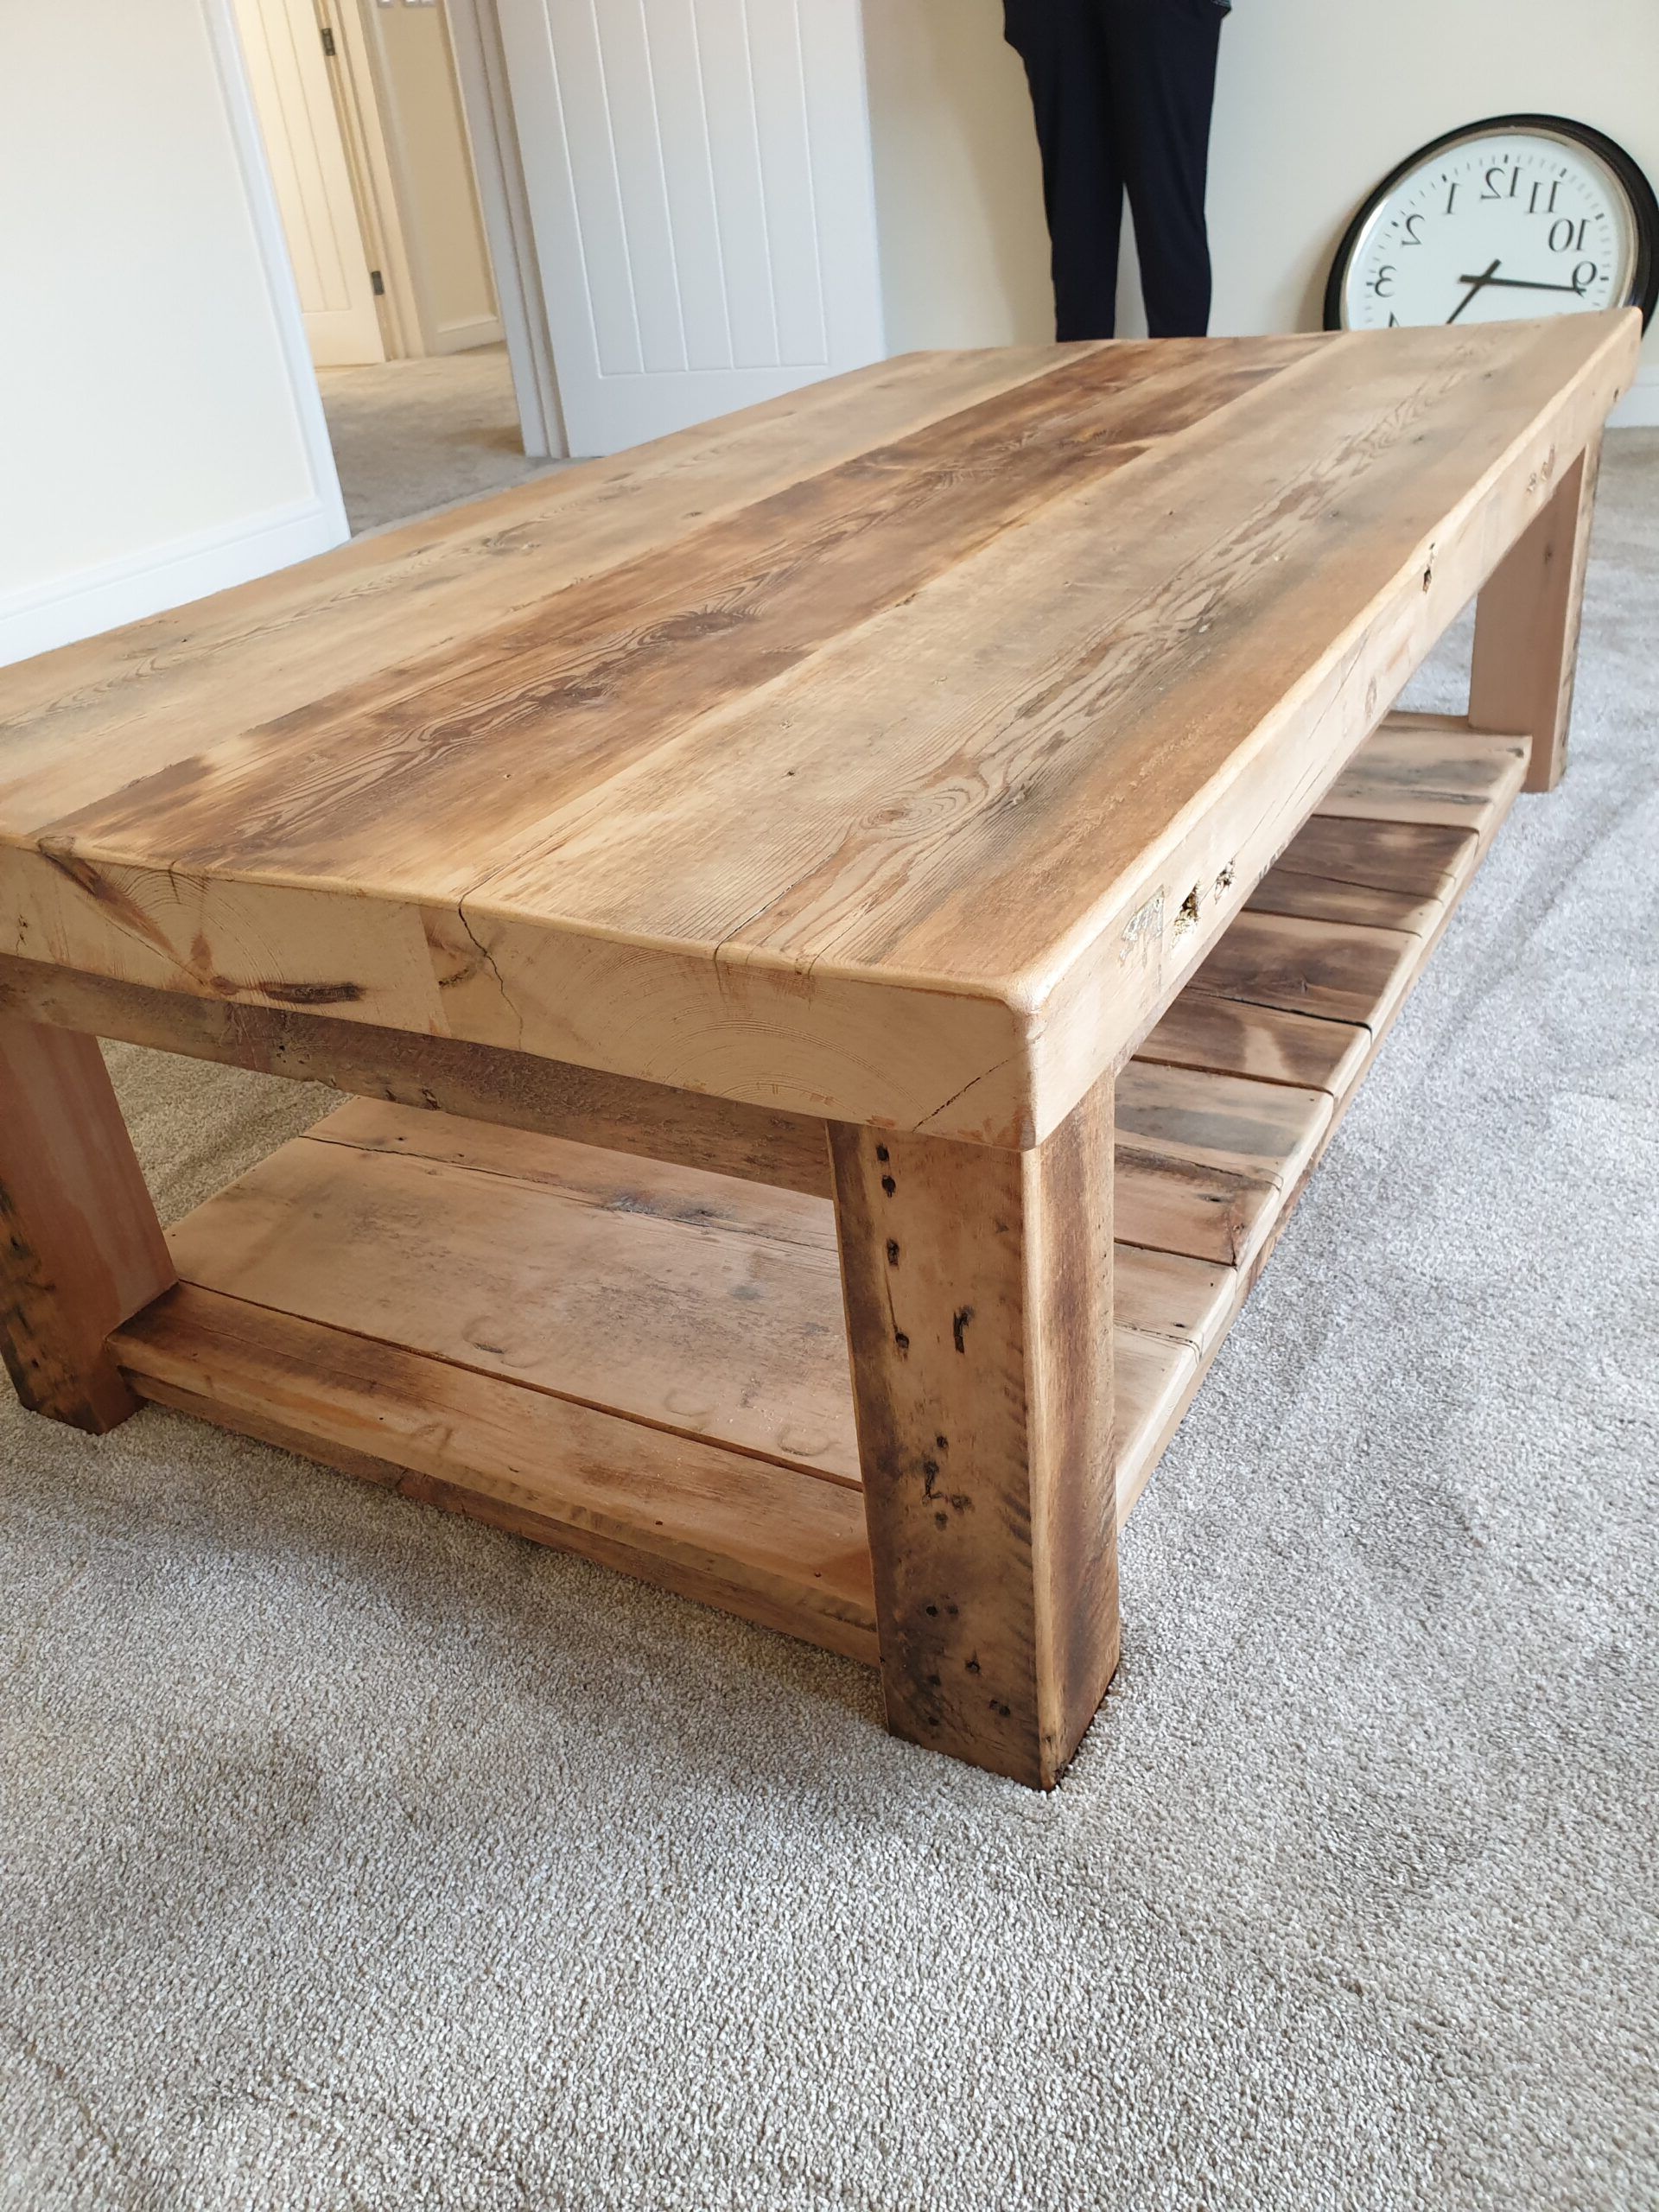 Rustic Wood Coffee Tables Inside Well Known Buy Rustic Wood Coffee Table Made From Reclaimed Timber (View 2 of 15)